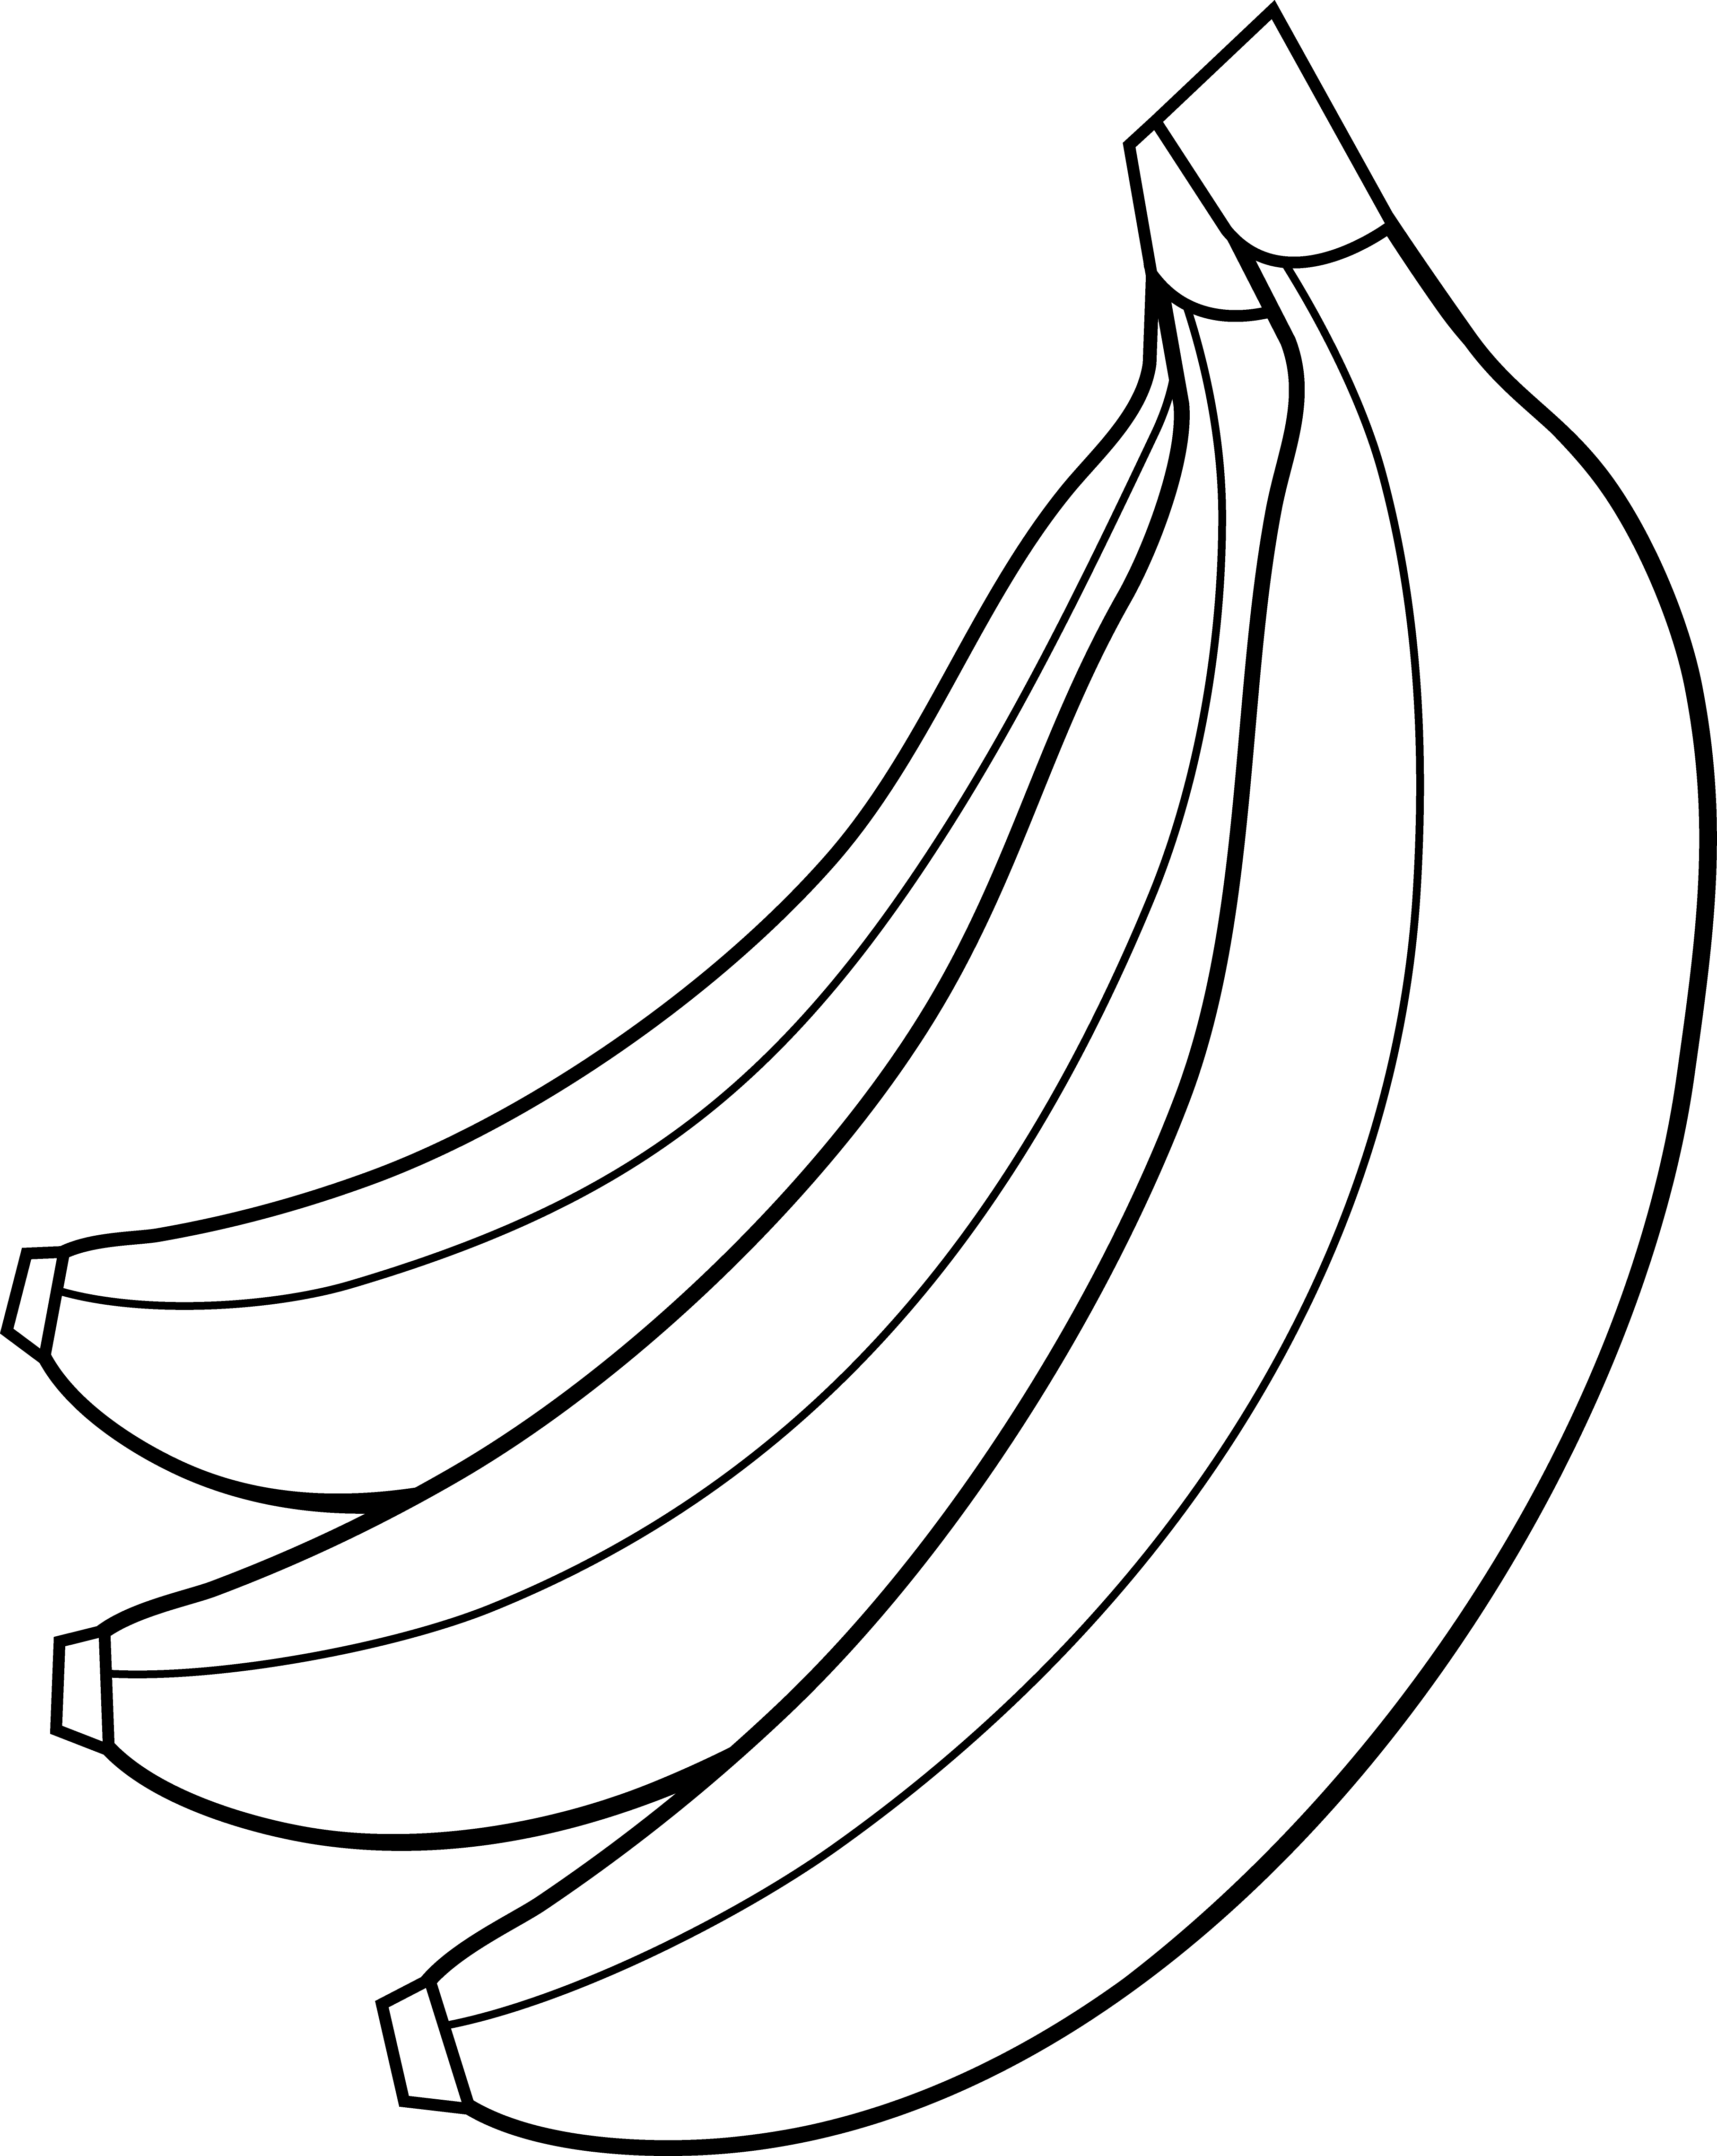 Colorable Bunch Of Bananas 